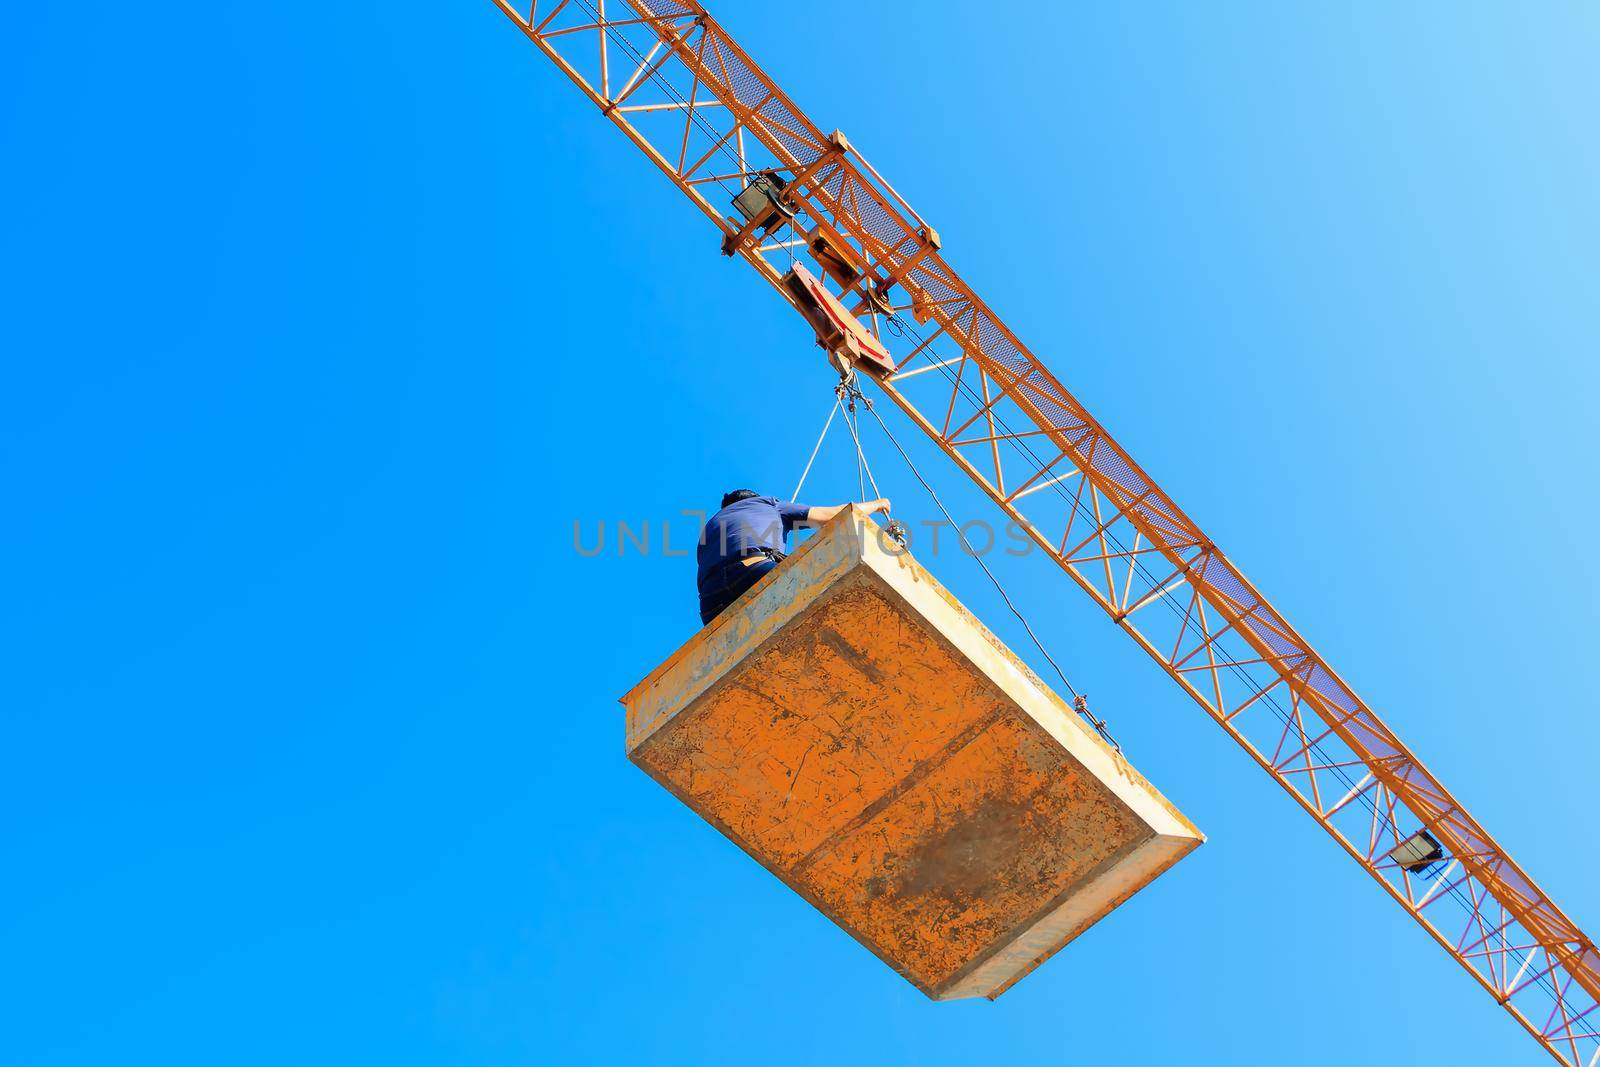 male in bucket of Tower crane. building construction site. blue sky background by pramot